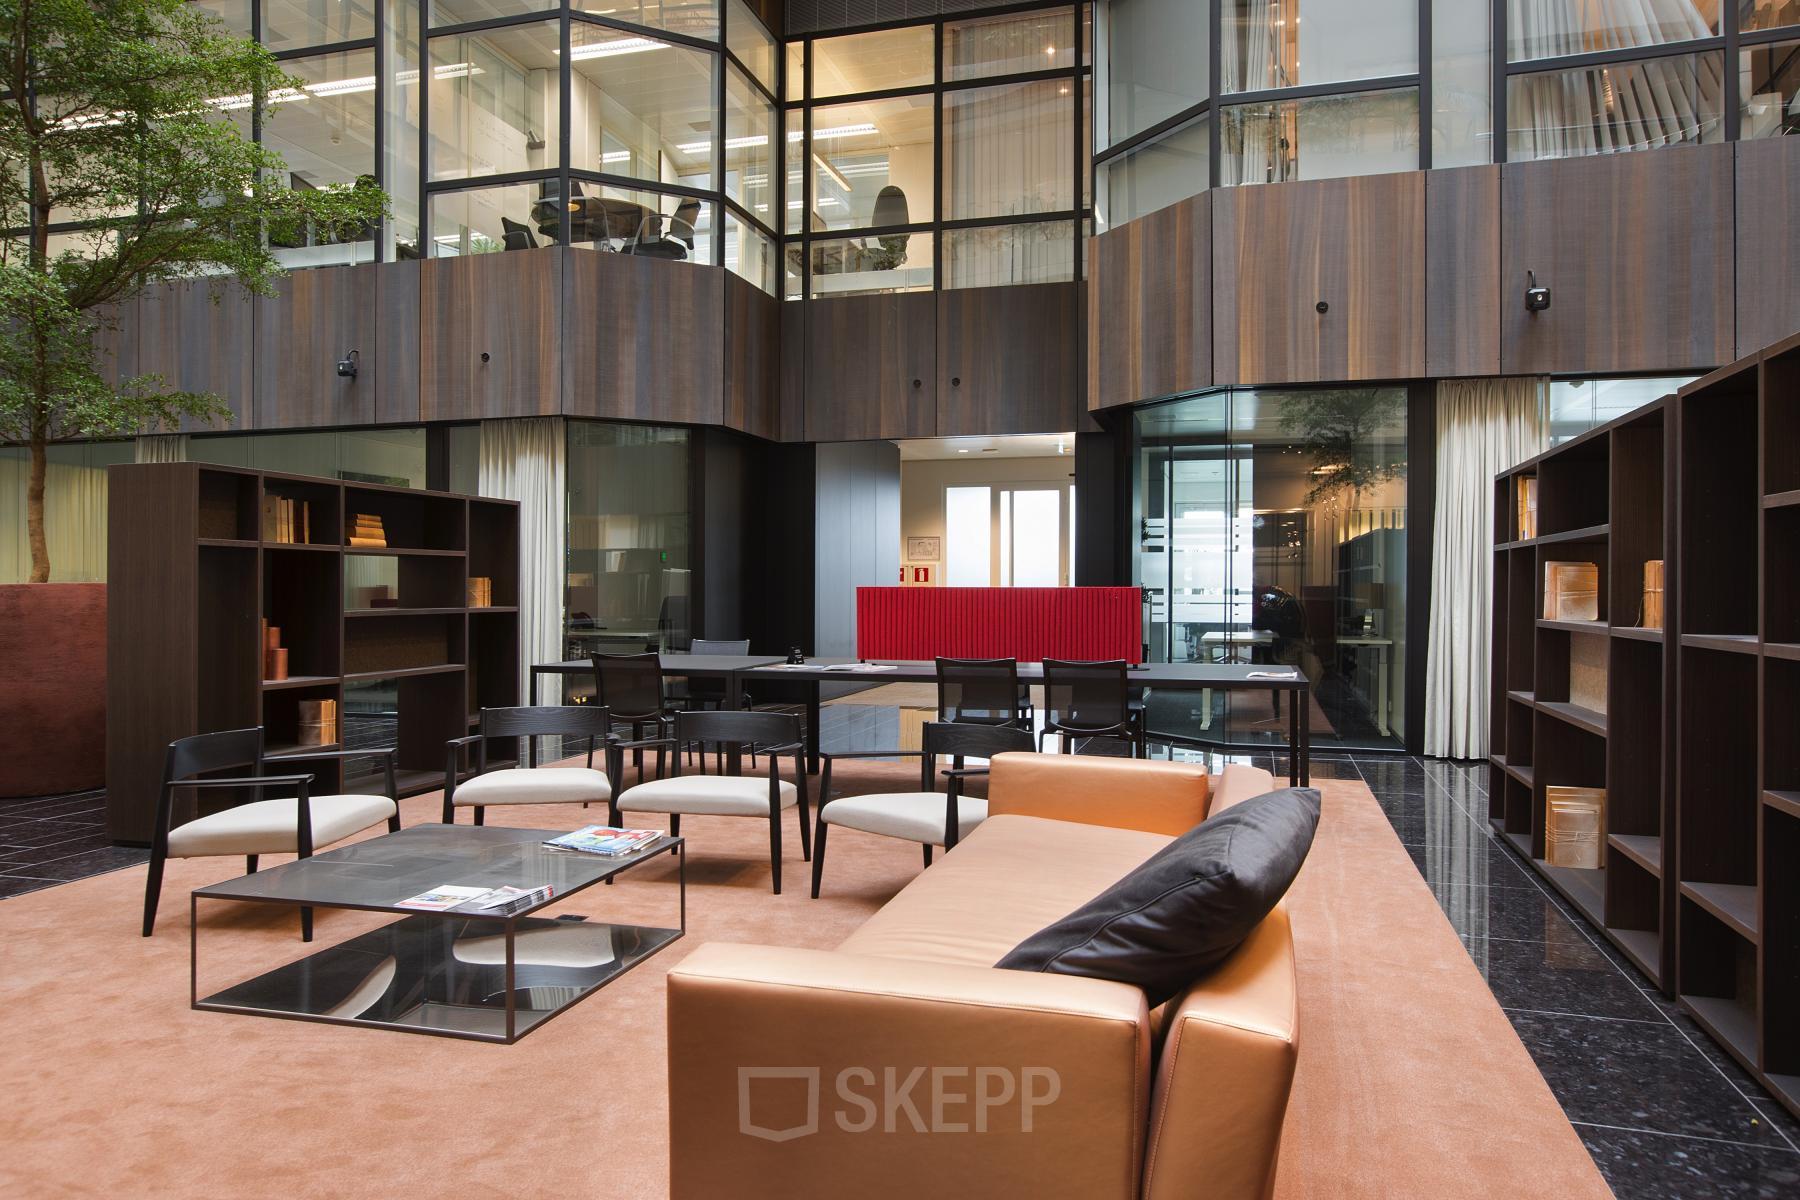 Elegant office space rental at Strawinskylaan 3051, Amsterdam Zuidas, with modern furnishings and a welcoming ambiance.